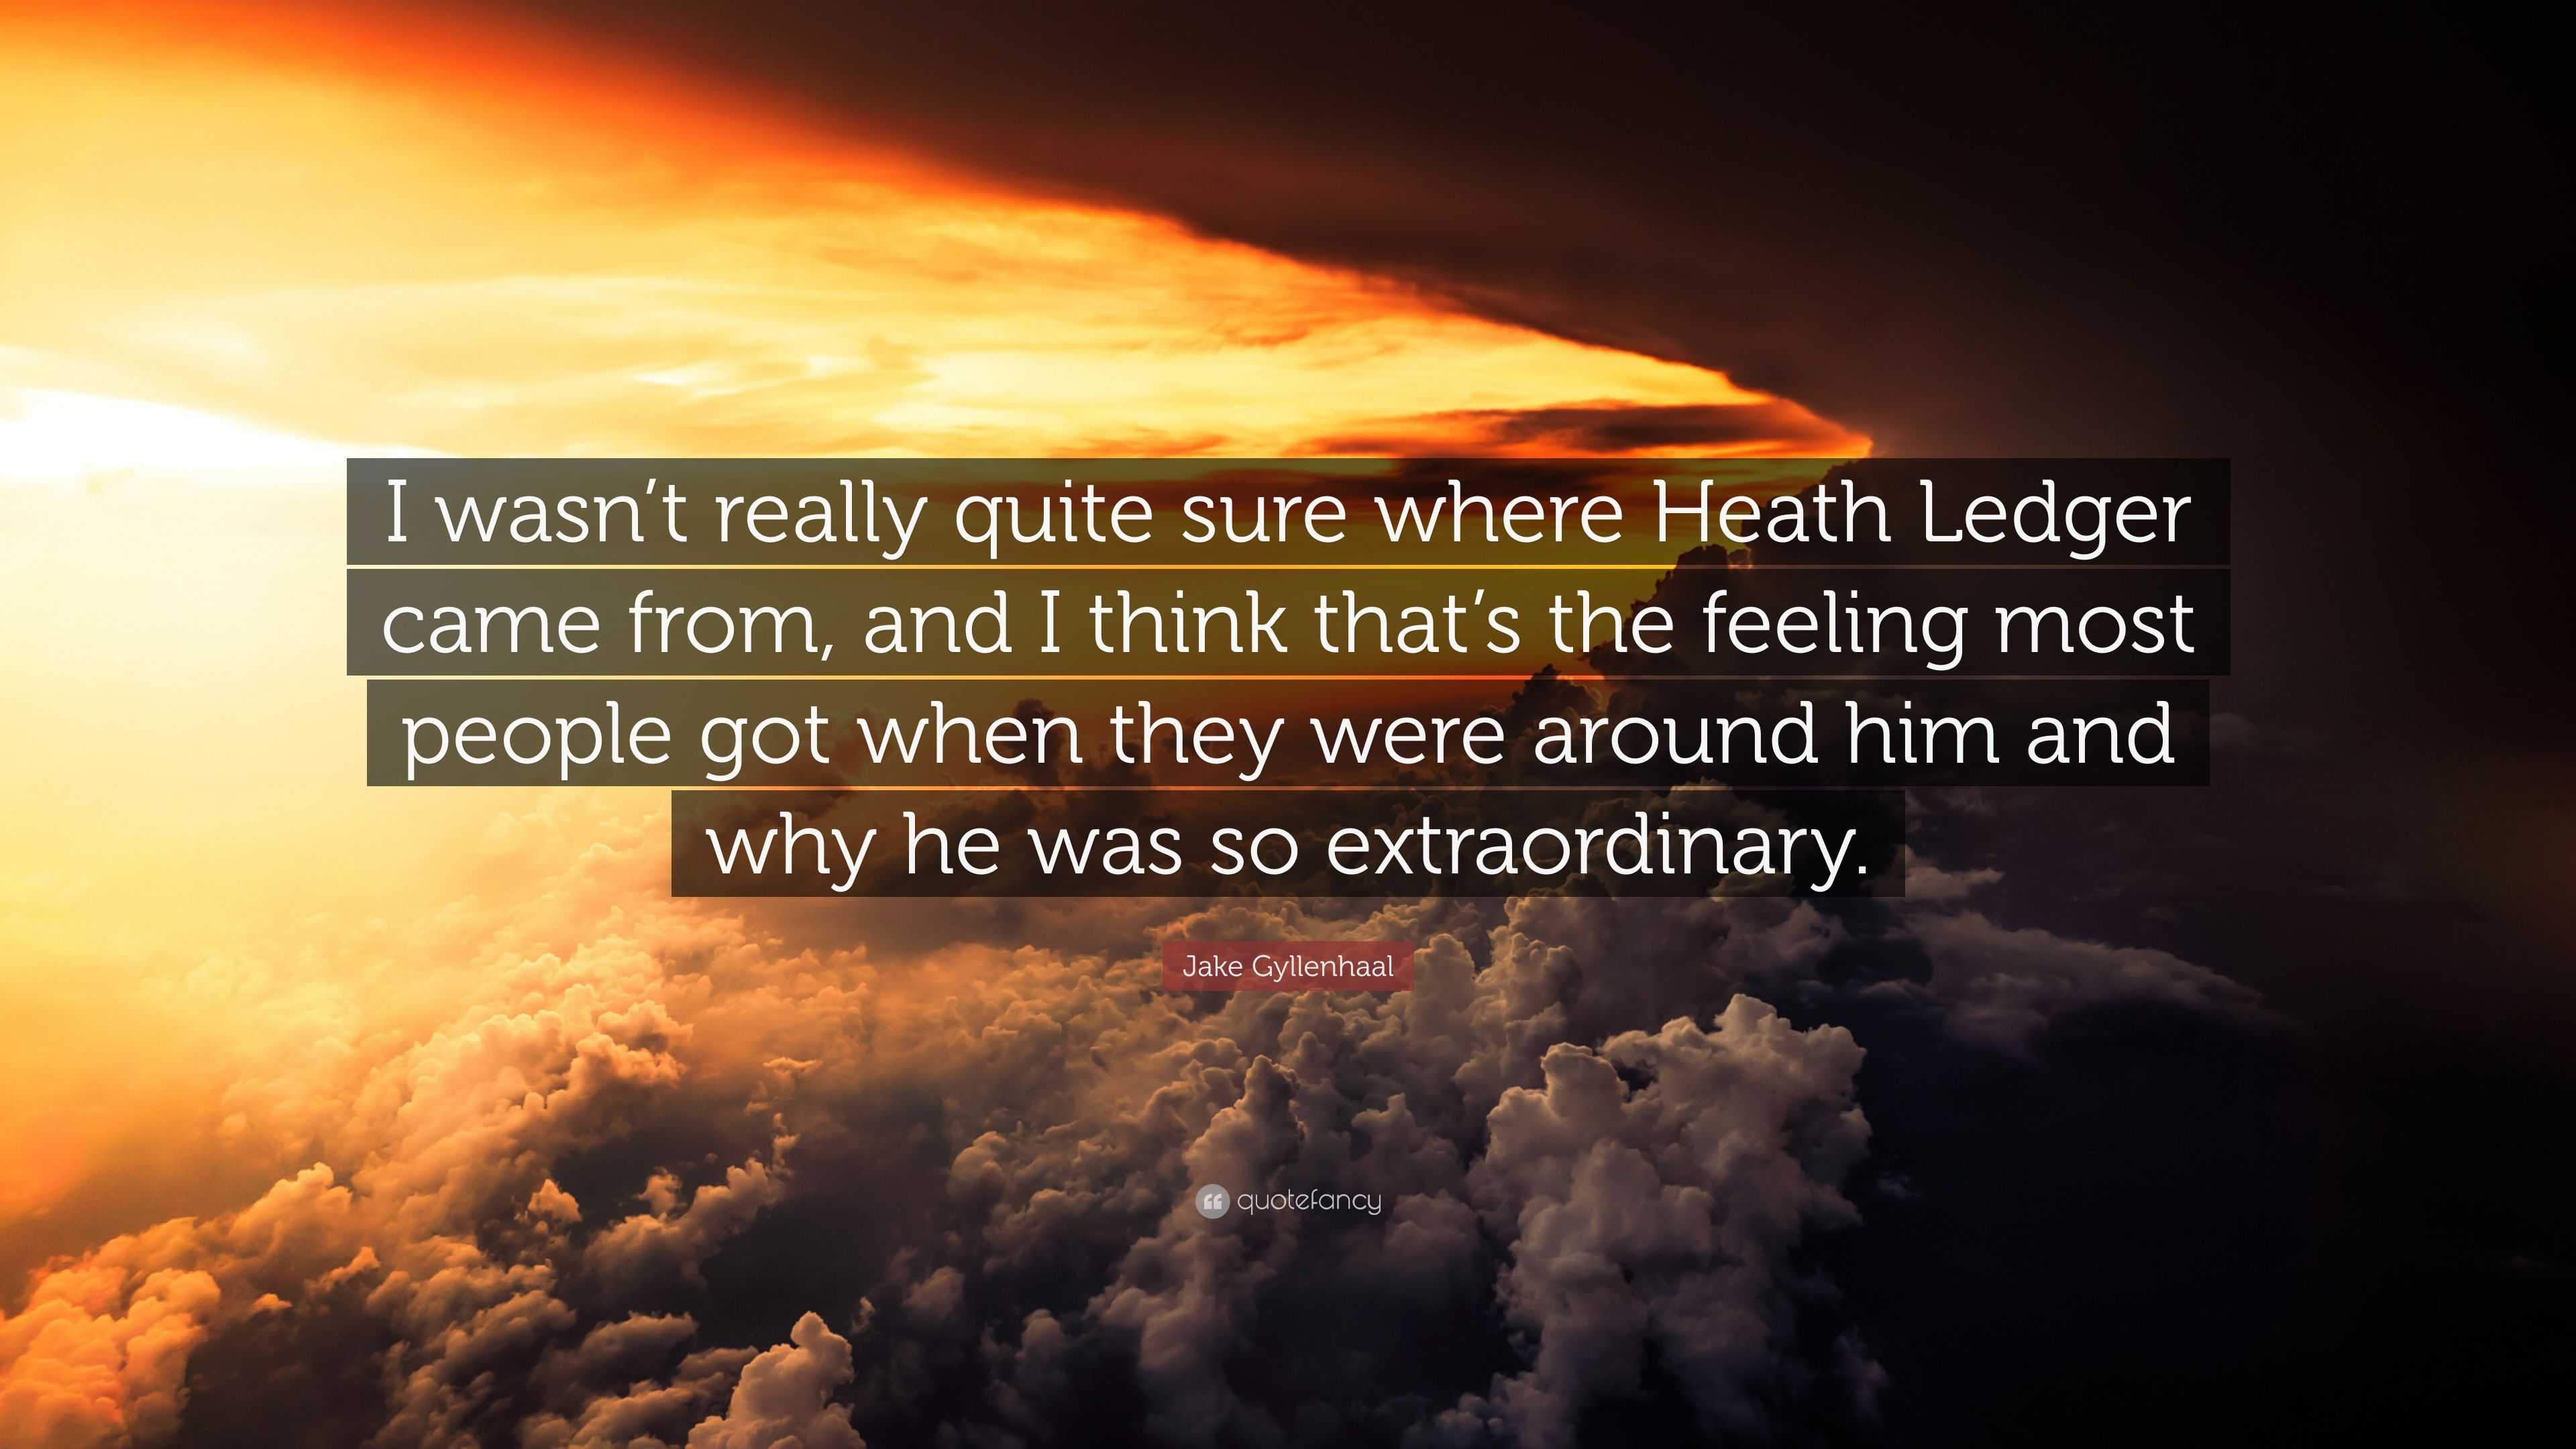 Jake Gyllenhaal Quote I Wasn T Really Quite Sure Where Heath Ledger Came From And I Think That S The Feeling Most People Got When They Were A